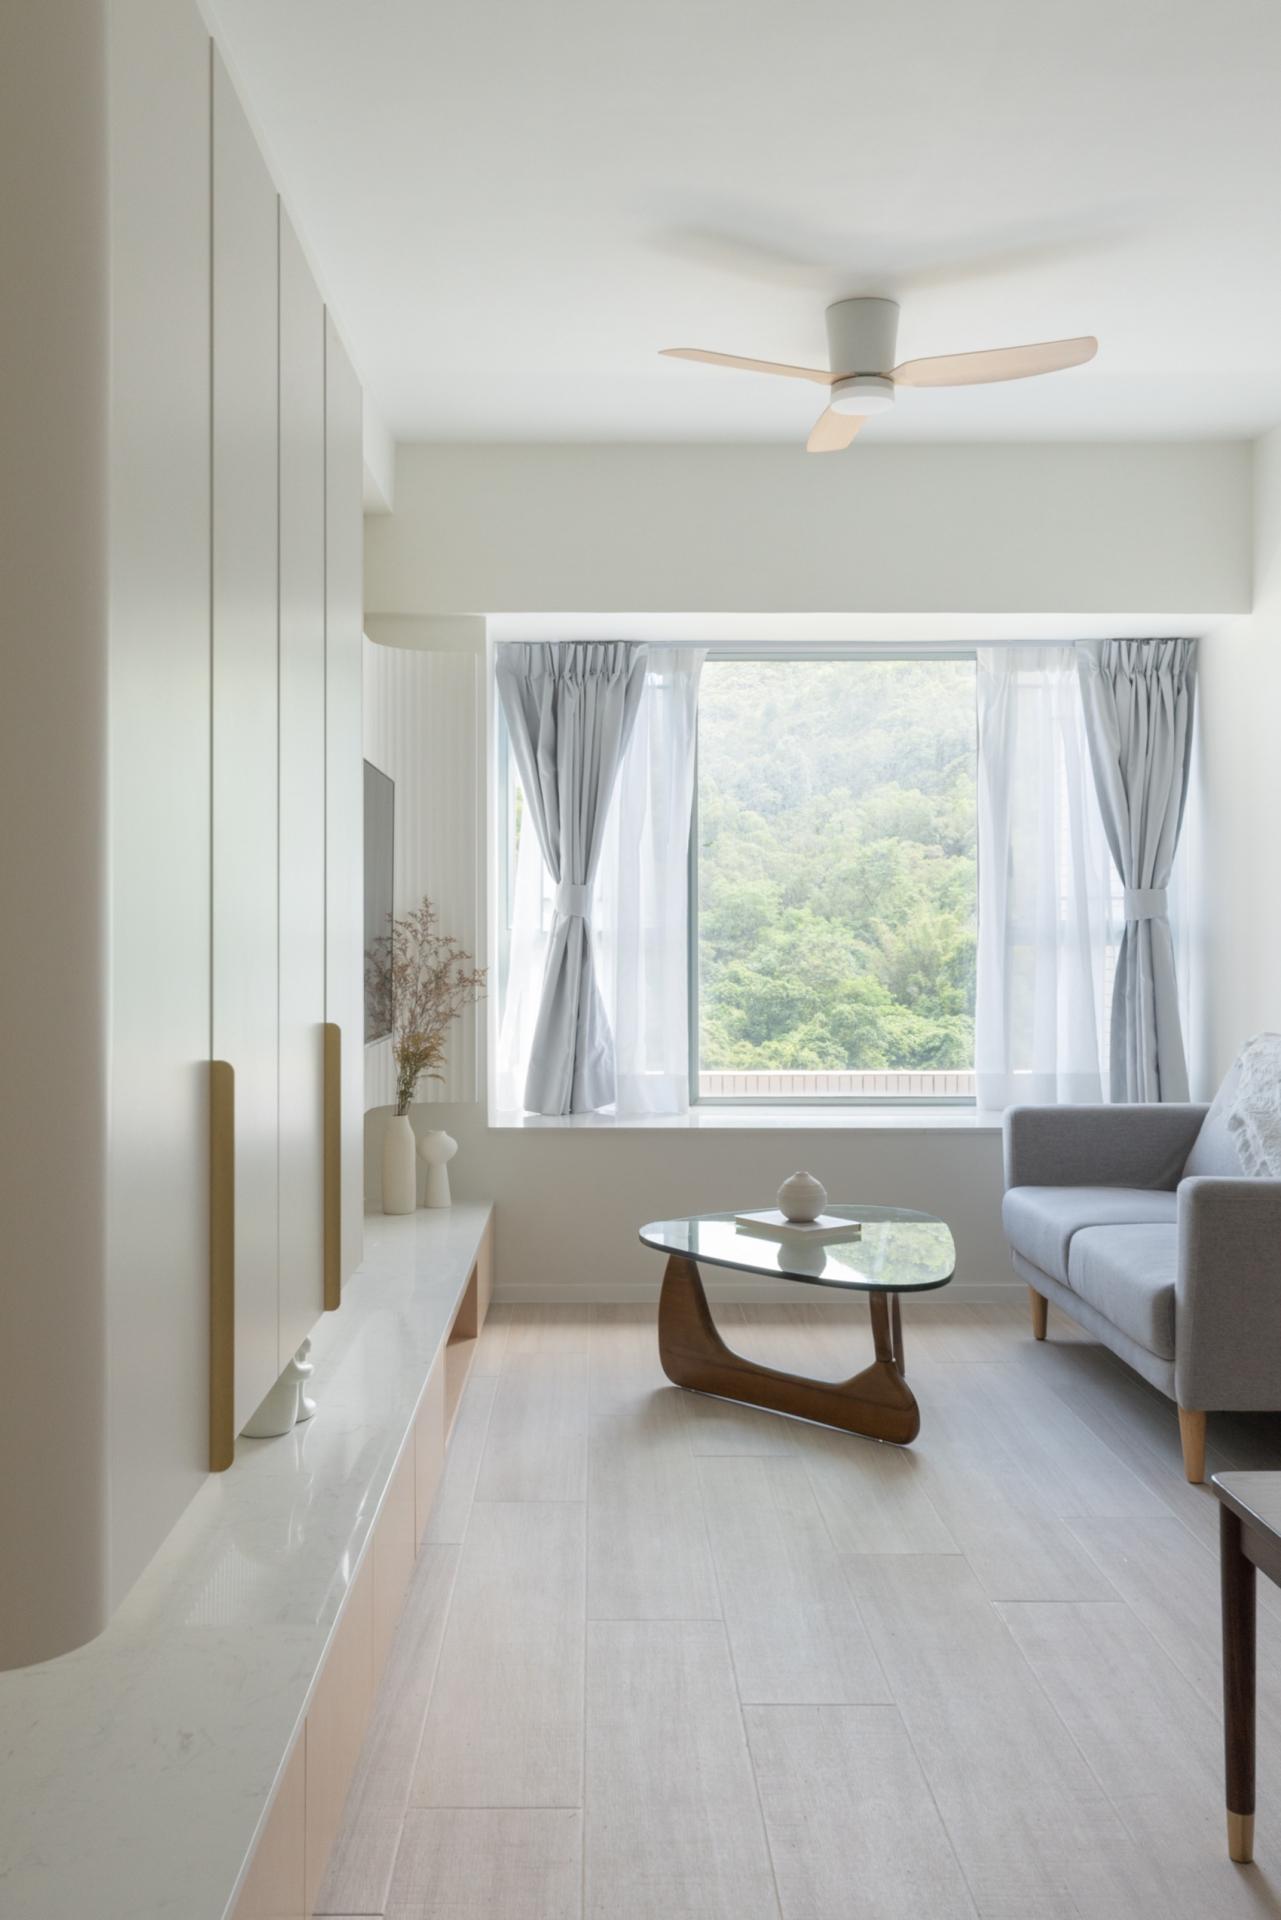  This 498 sq. ft. Japandi-style apartment in Tiu Keng Leng is a picture of serenity